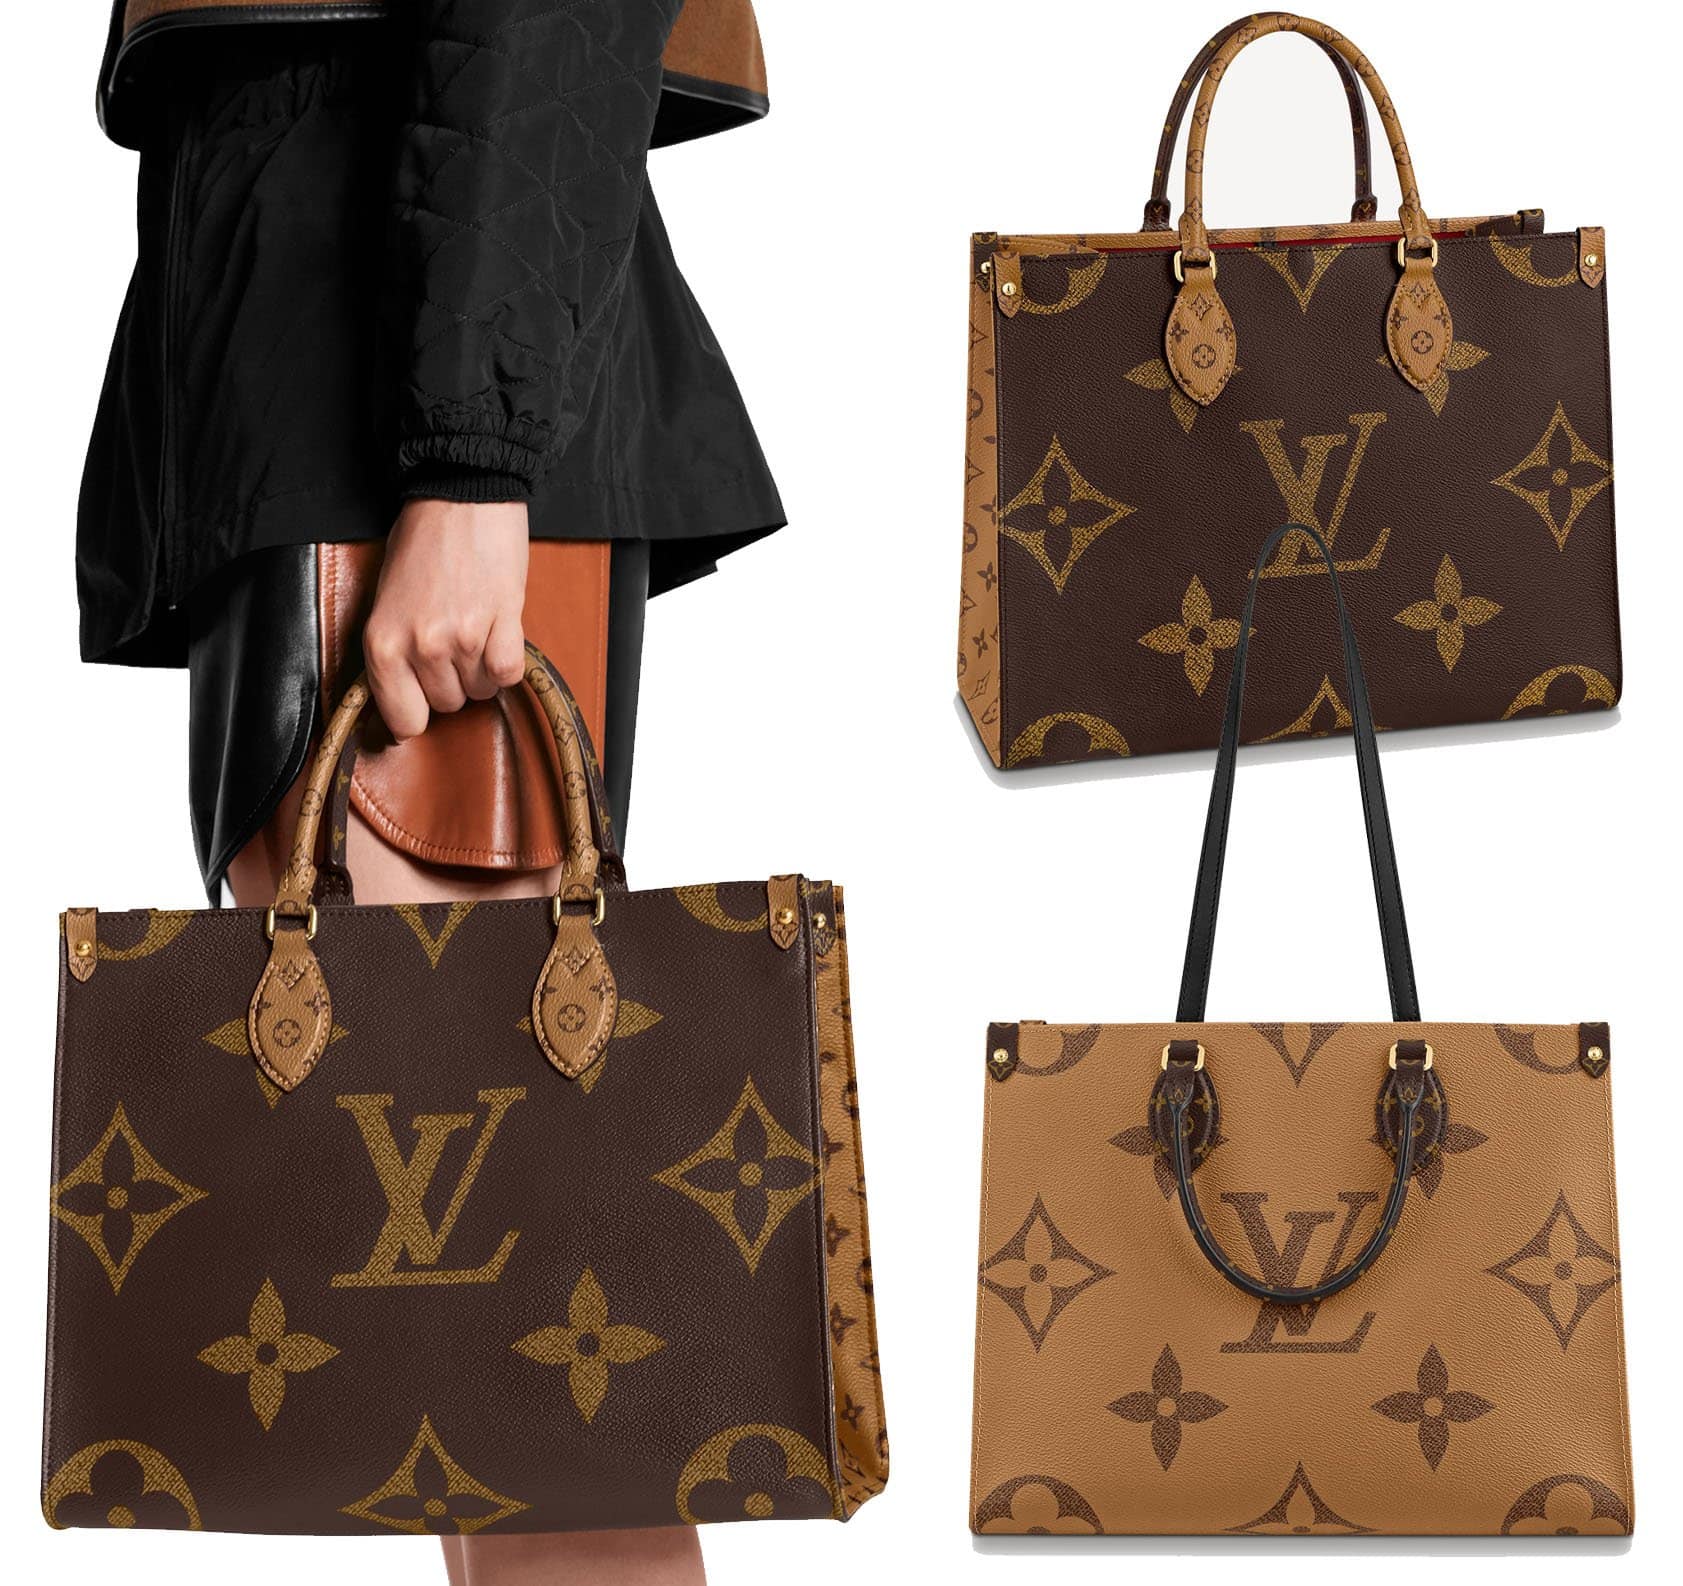 Whether for business or shopping, the Louis Vuitton OnTheGo MM offers plenty of room for essentials and more